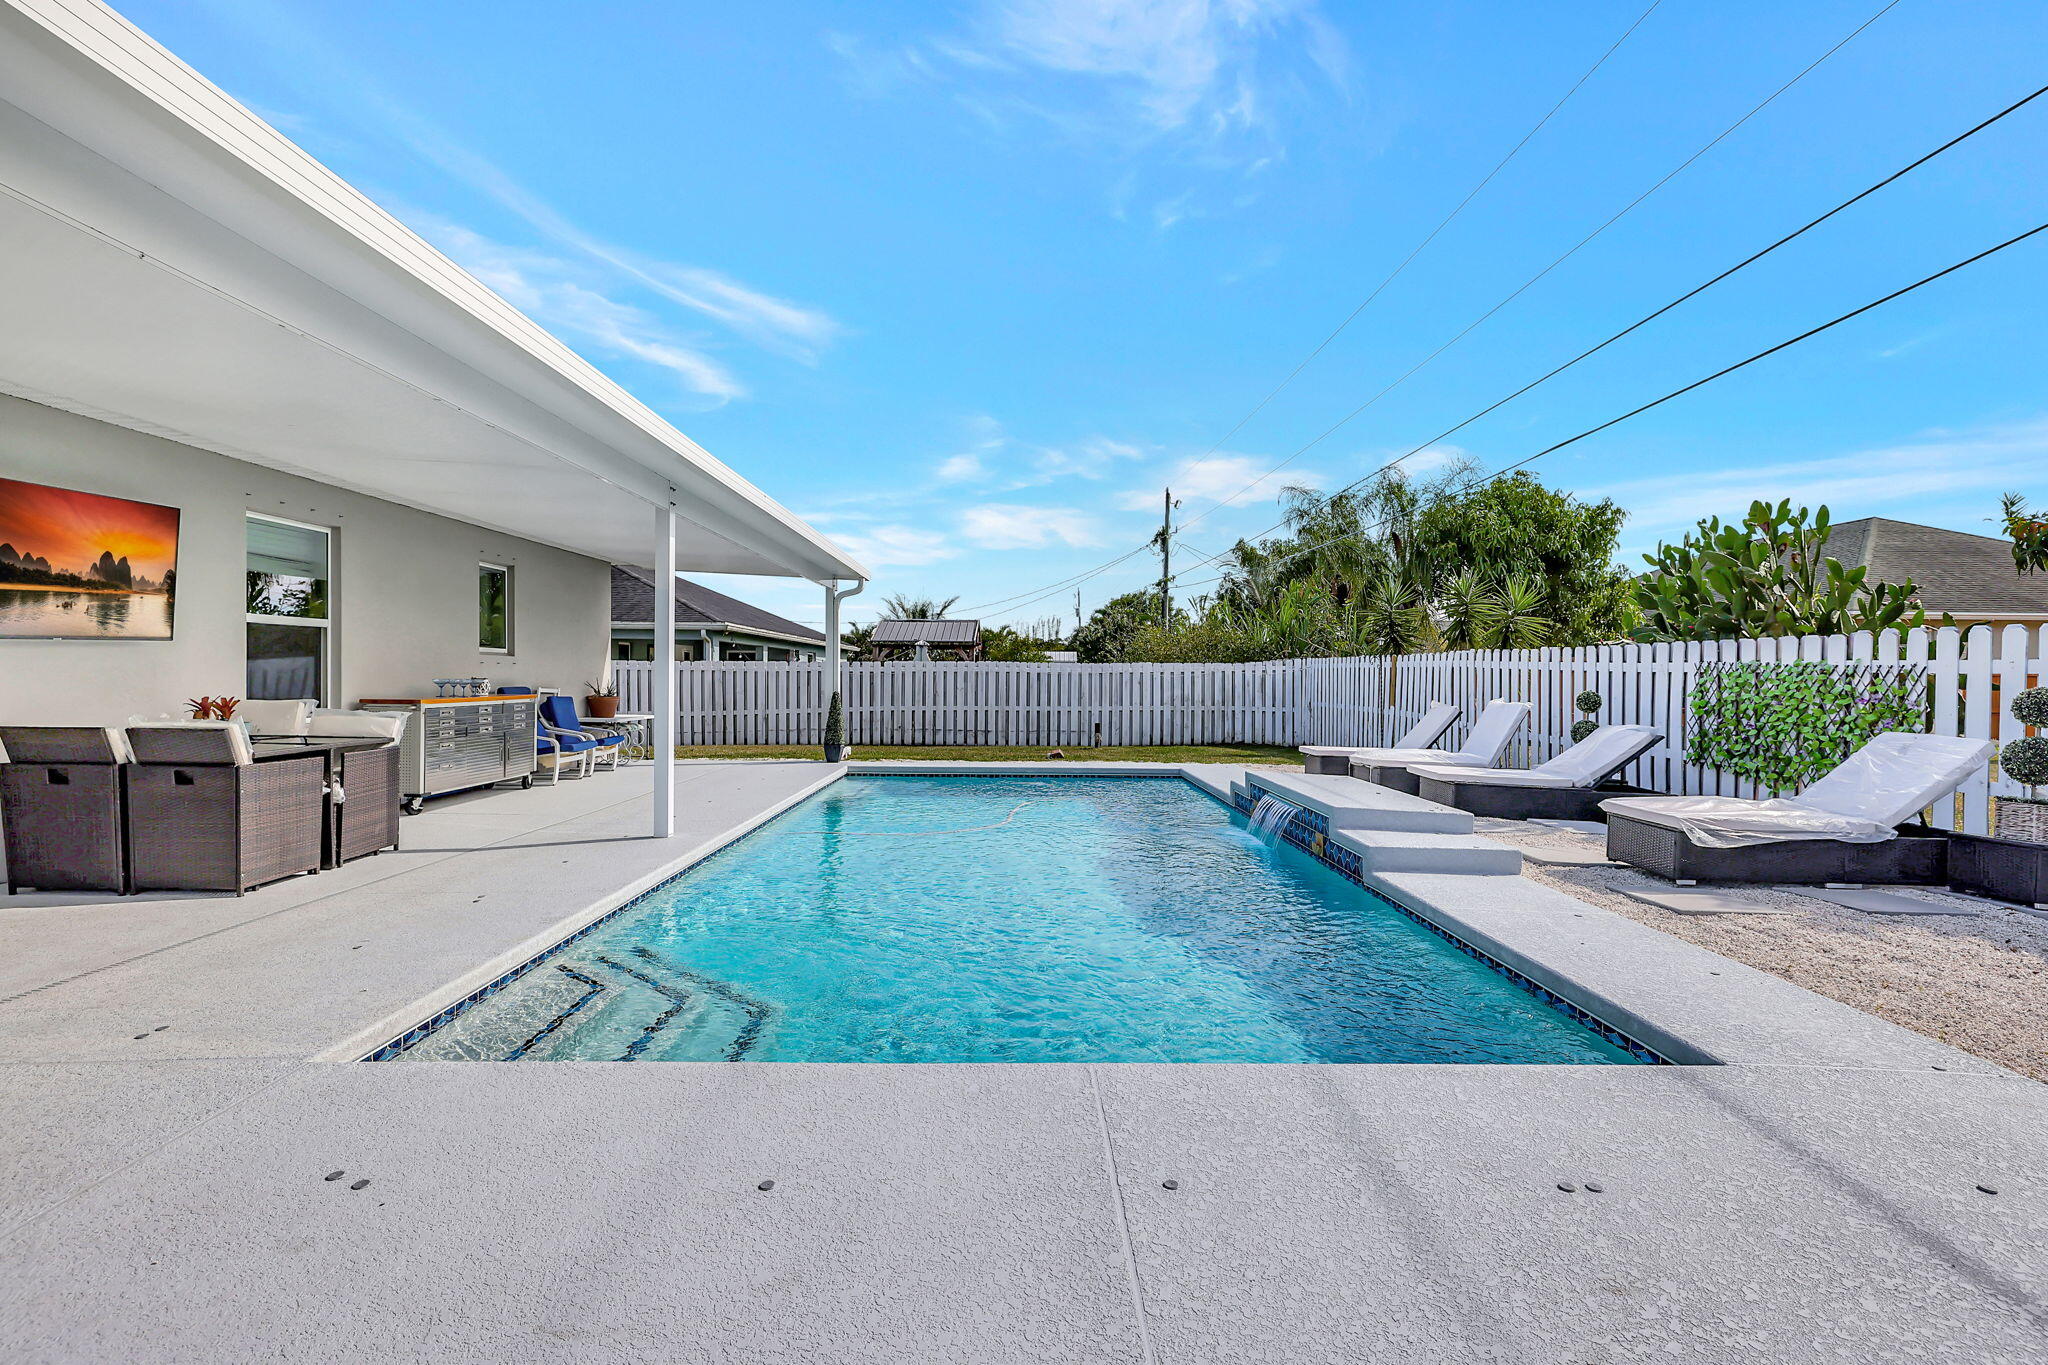 Contemporary In Ground Pool